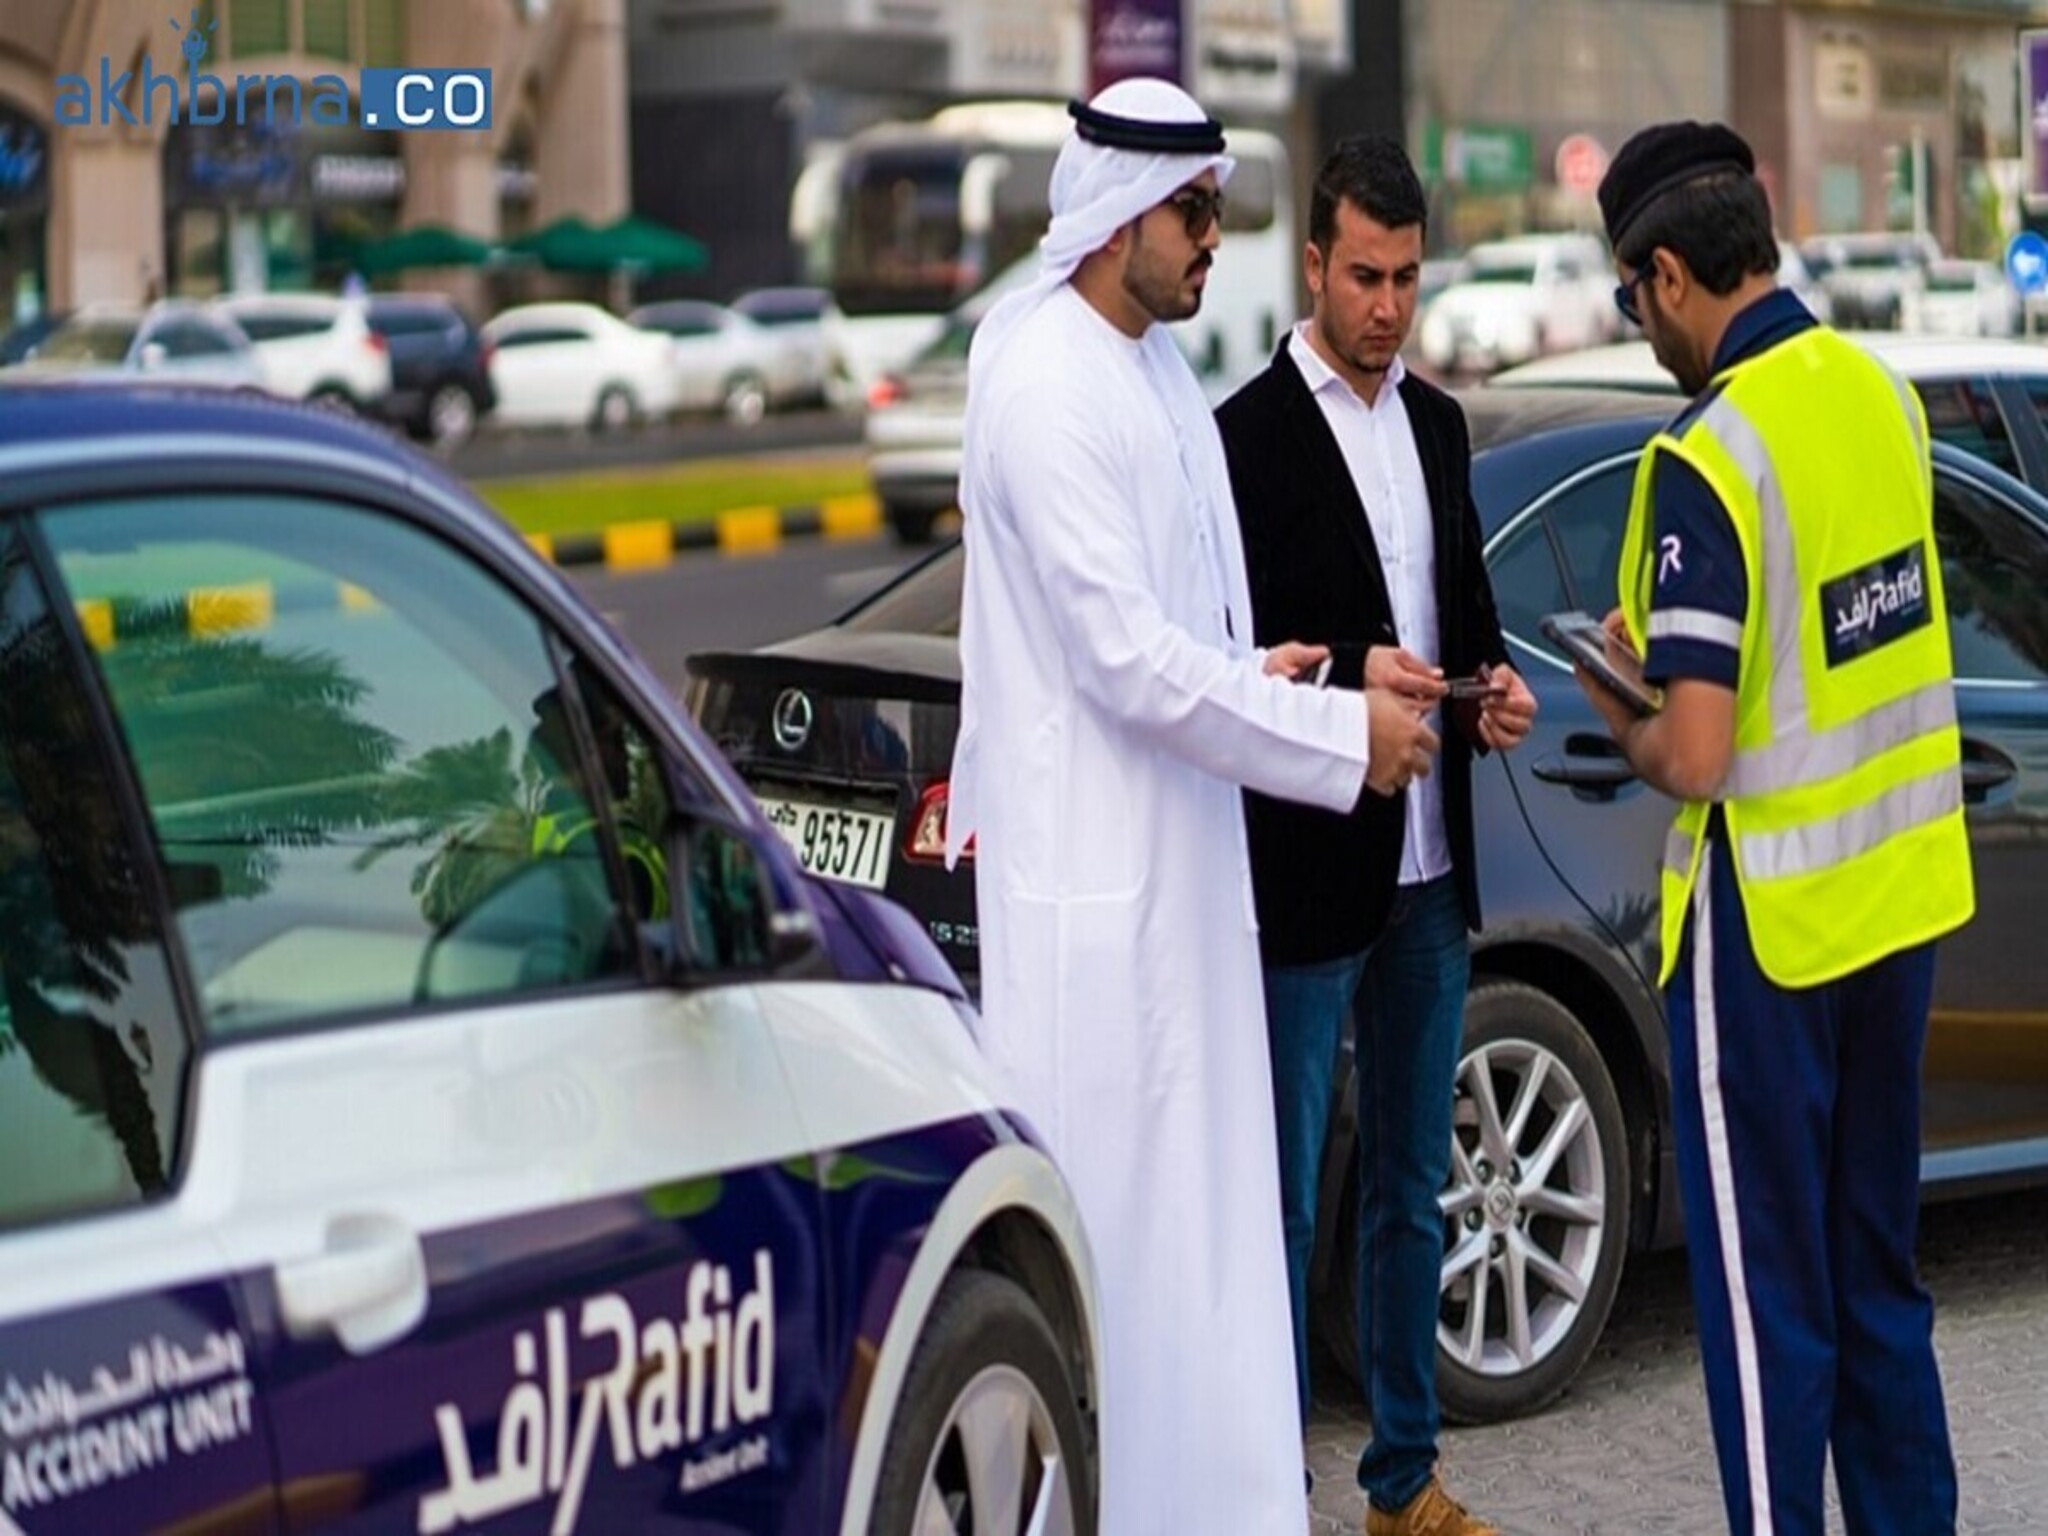 UAE: Rafid Introduce New Number for Reporting Minor Traffic Accidents in Sharjah